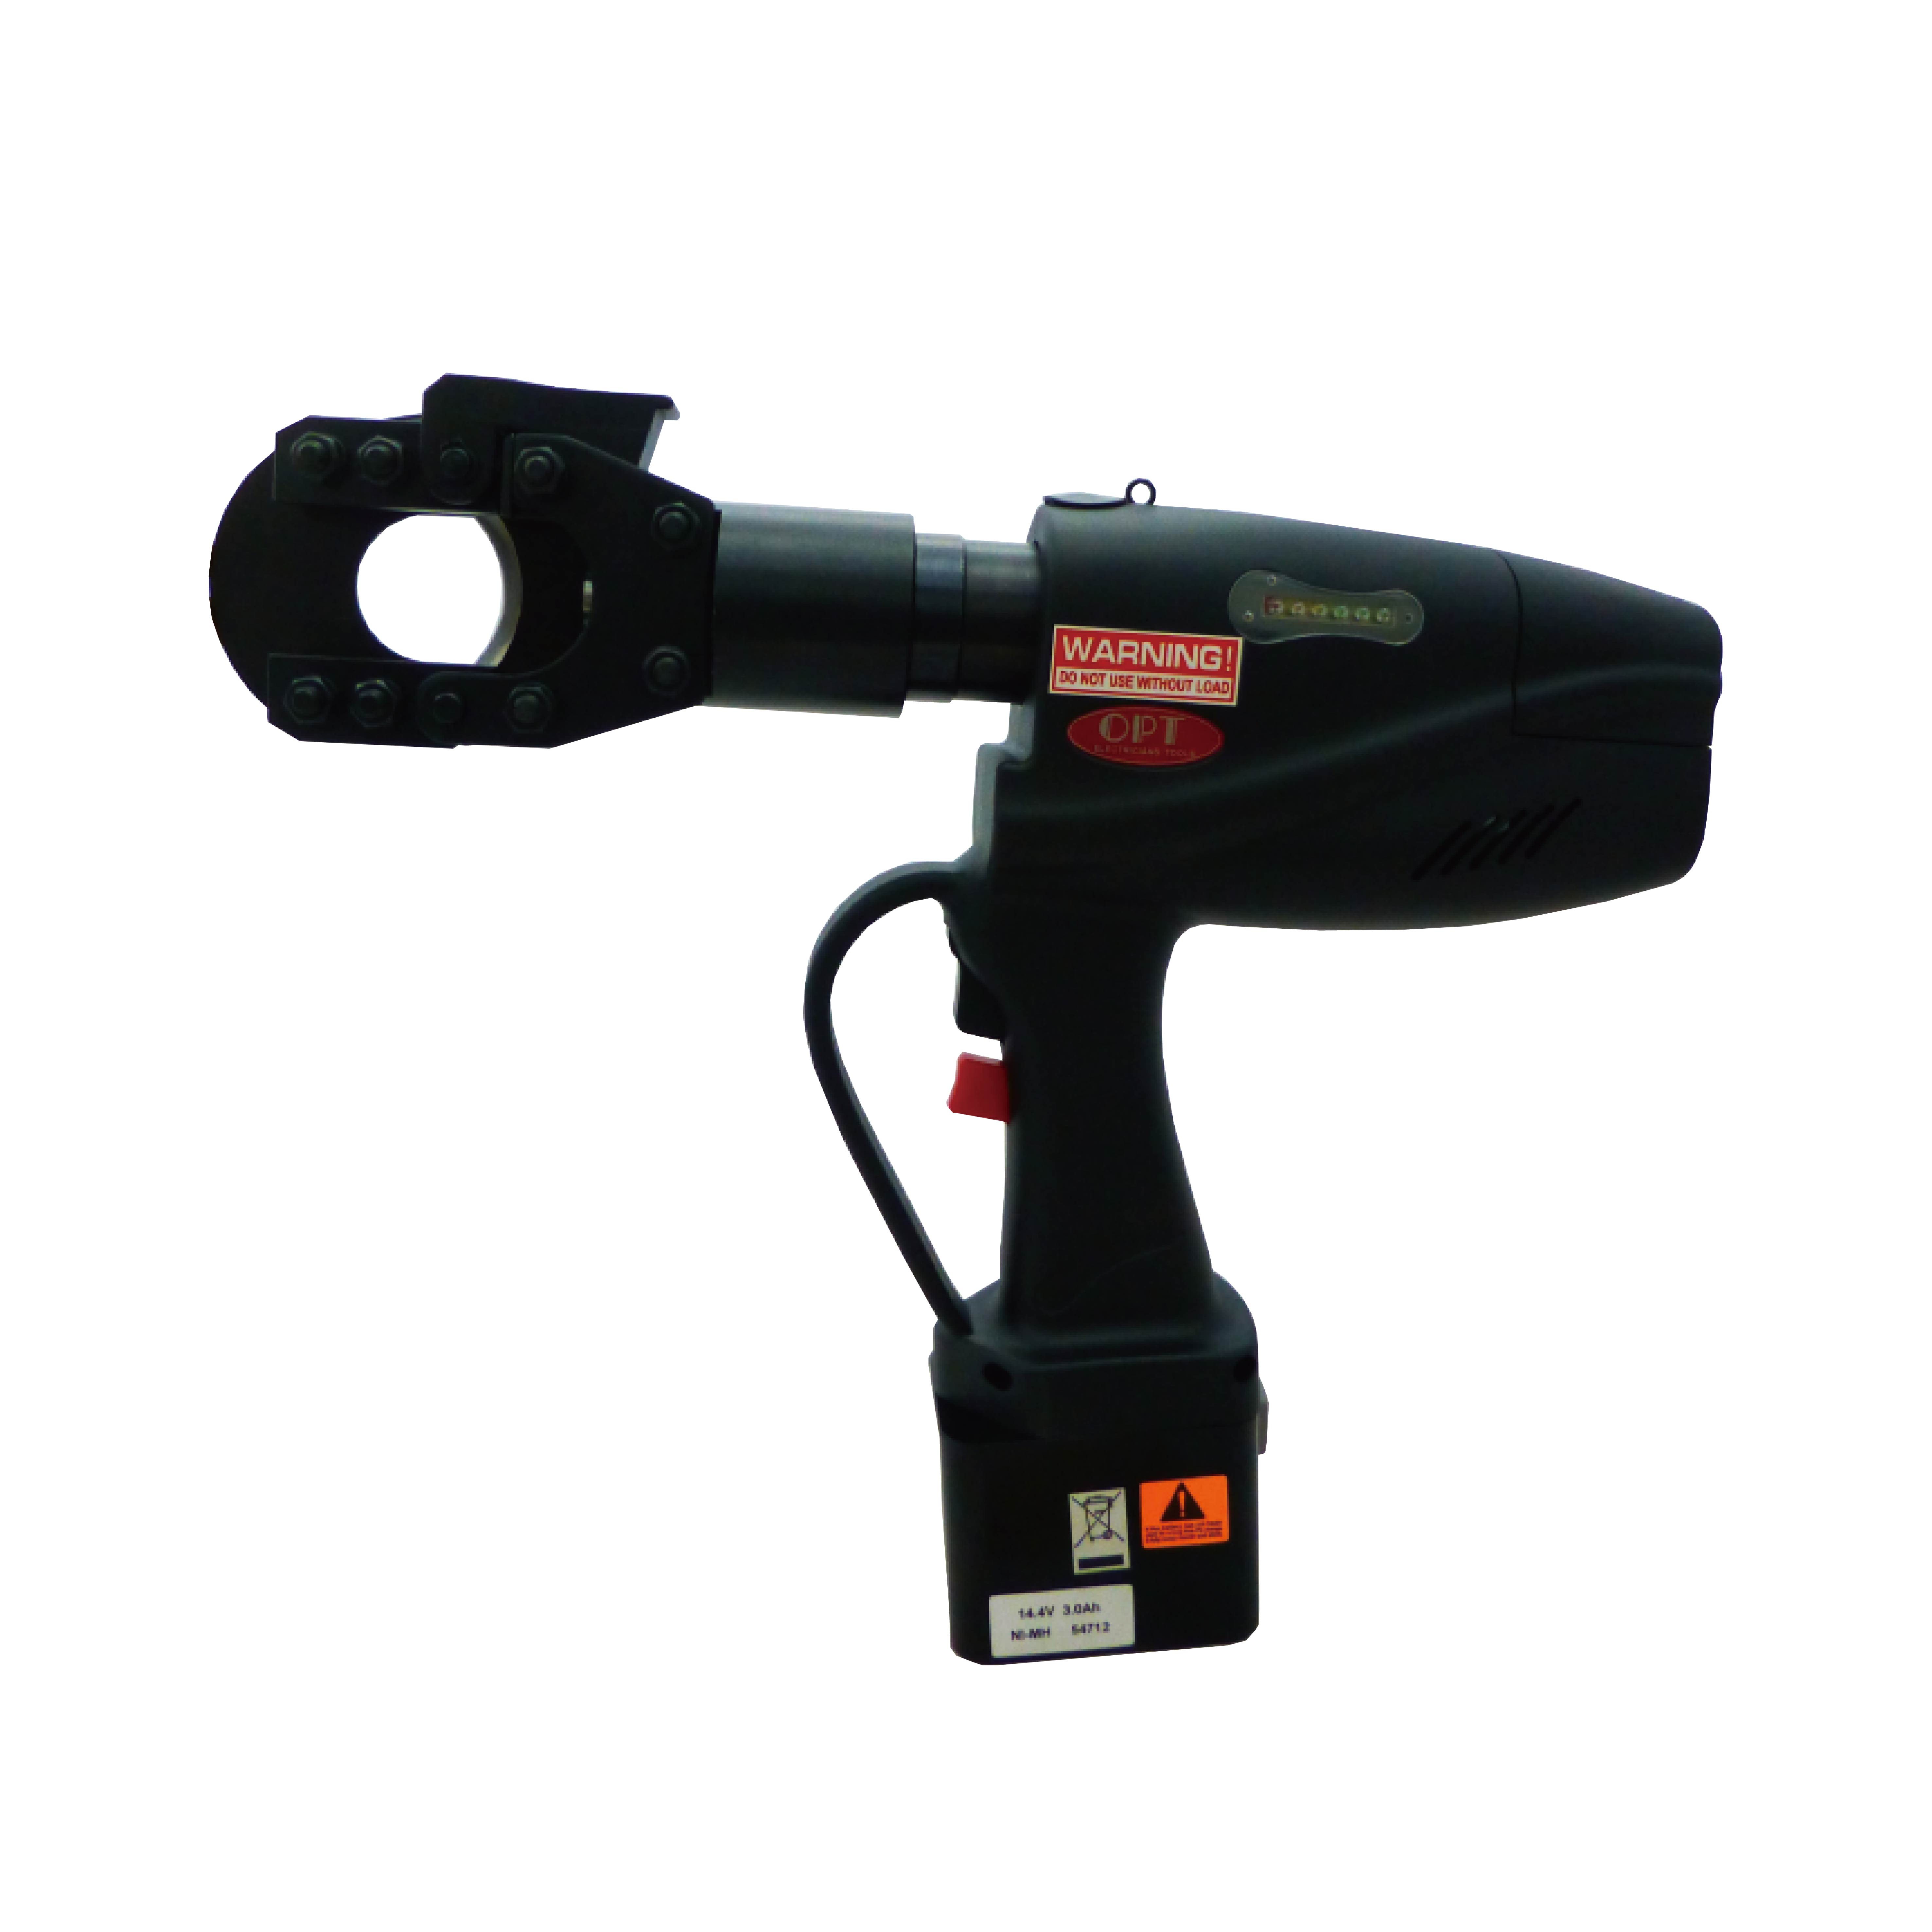 ECL-40 CORDLESS HYDRAULIC CABLE CUTTERS